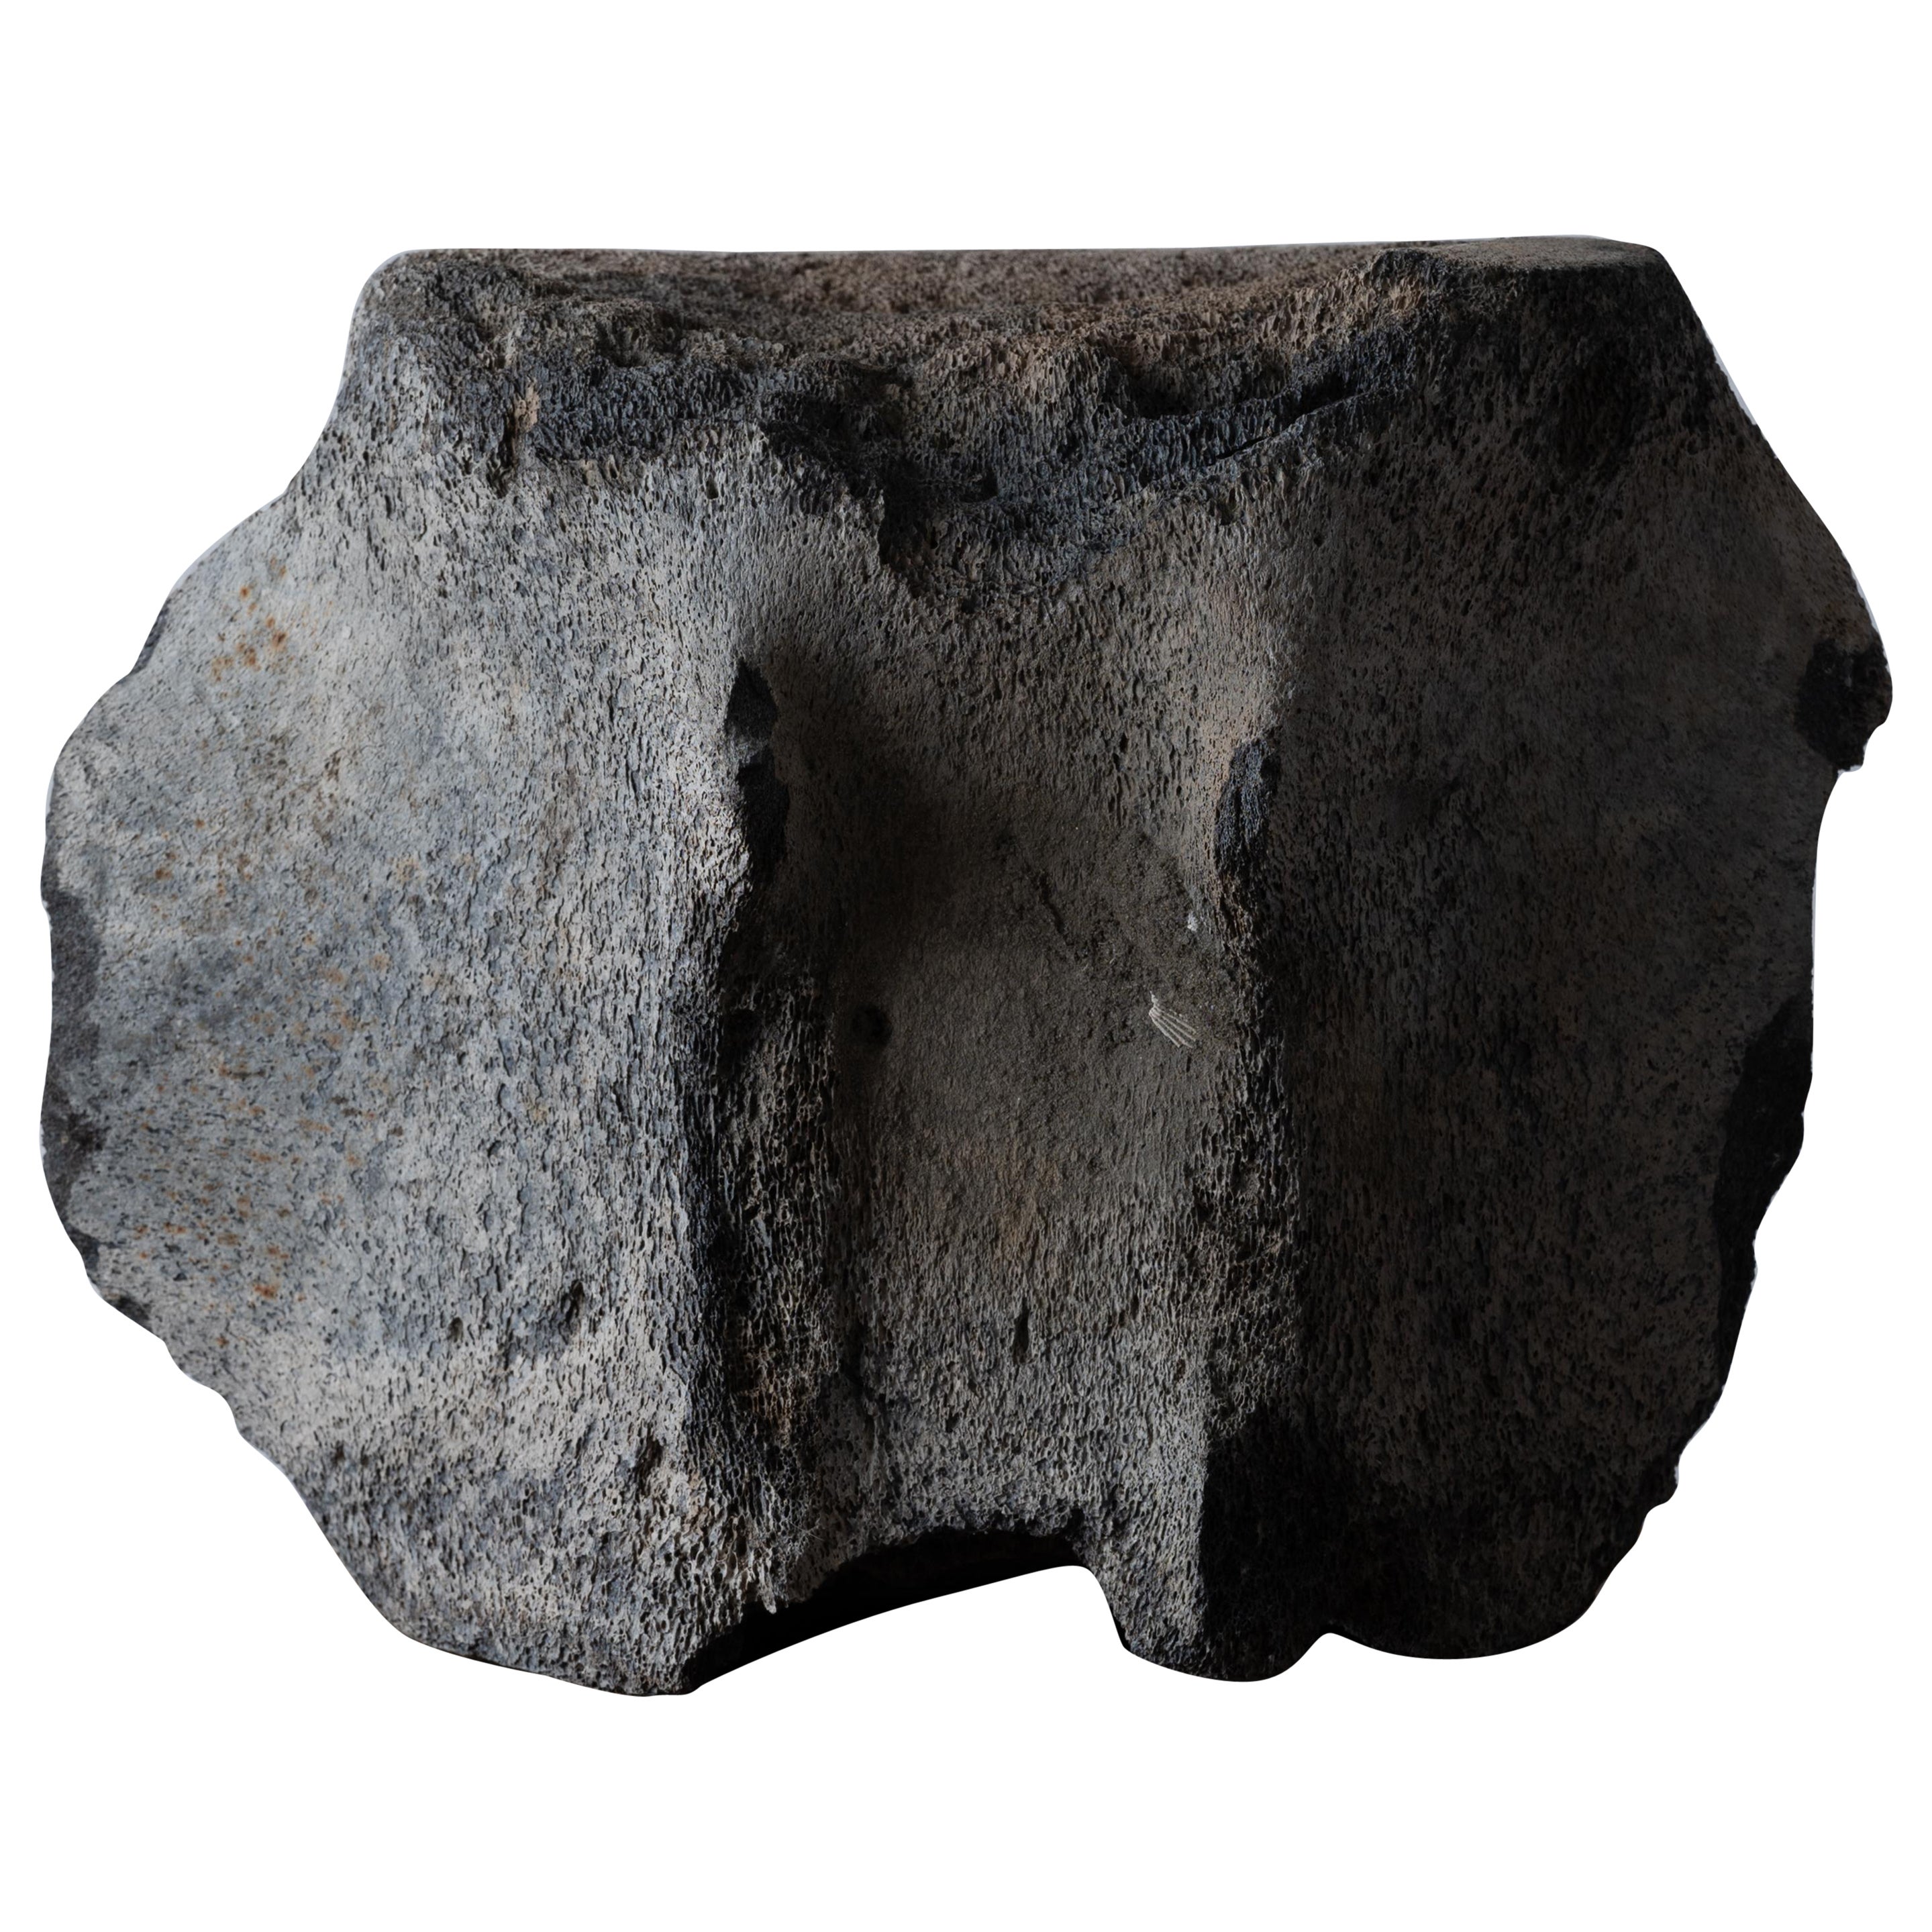 A Fossilized Whale Vertebrae For Sale